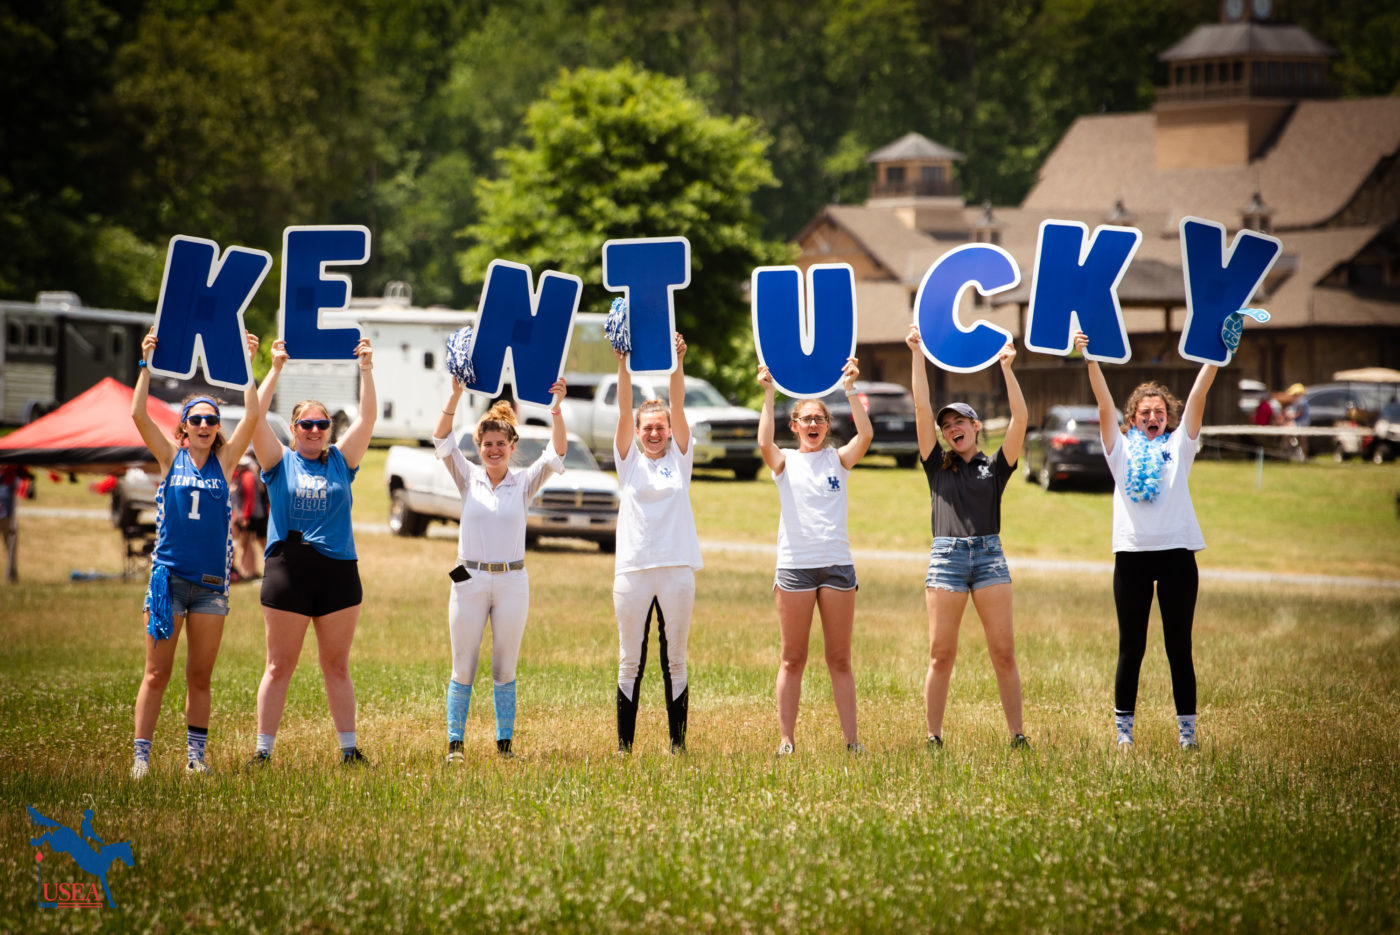 University of Kentucky cheering on their riders on cross-country. USEA/ Meagan DeLisle photo